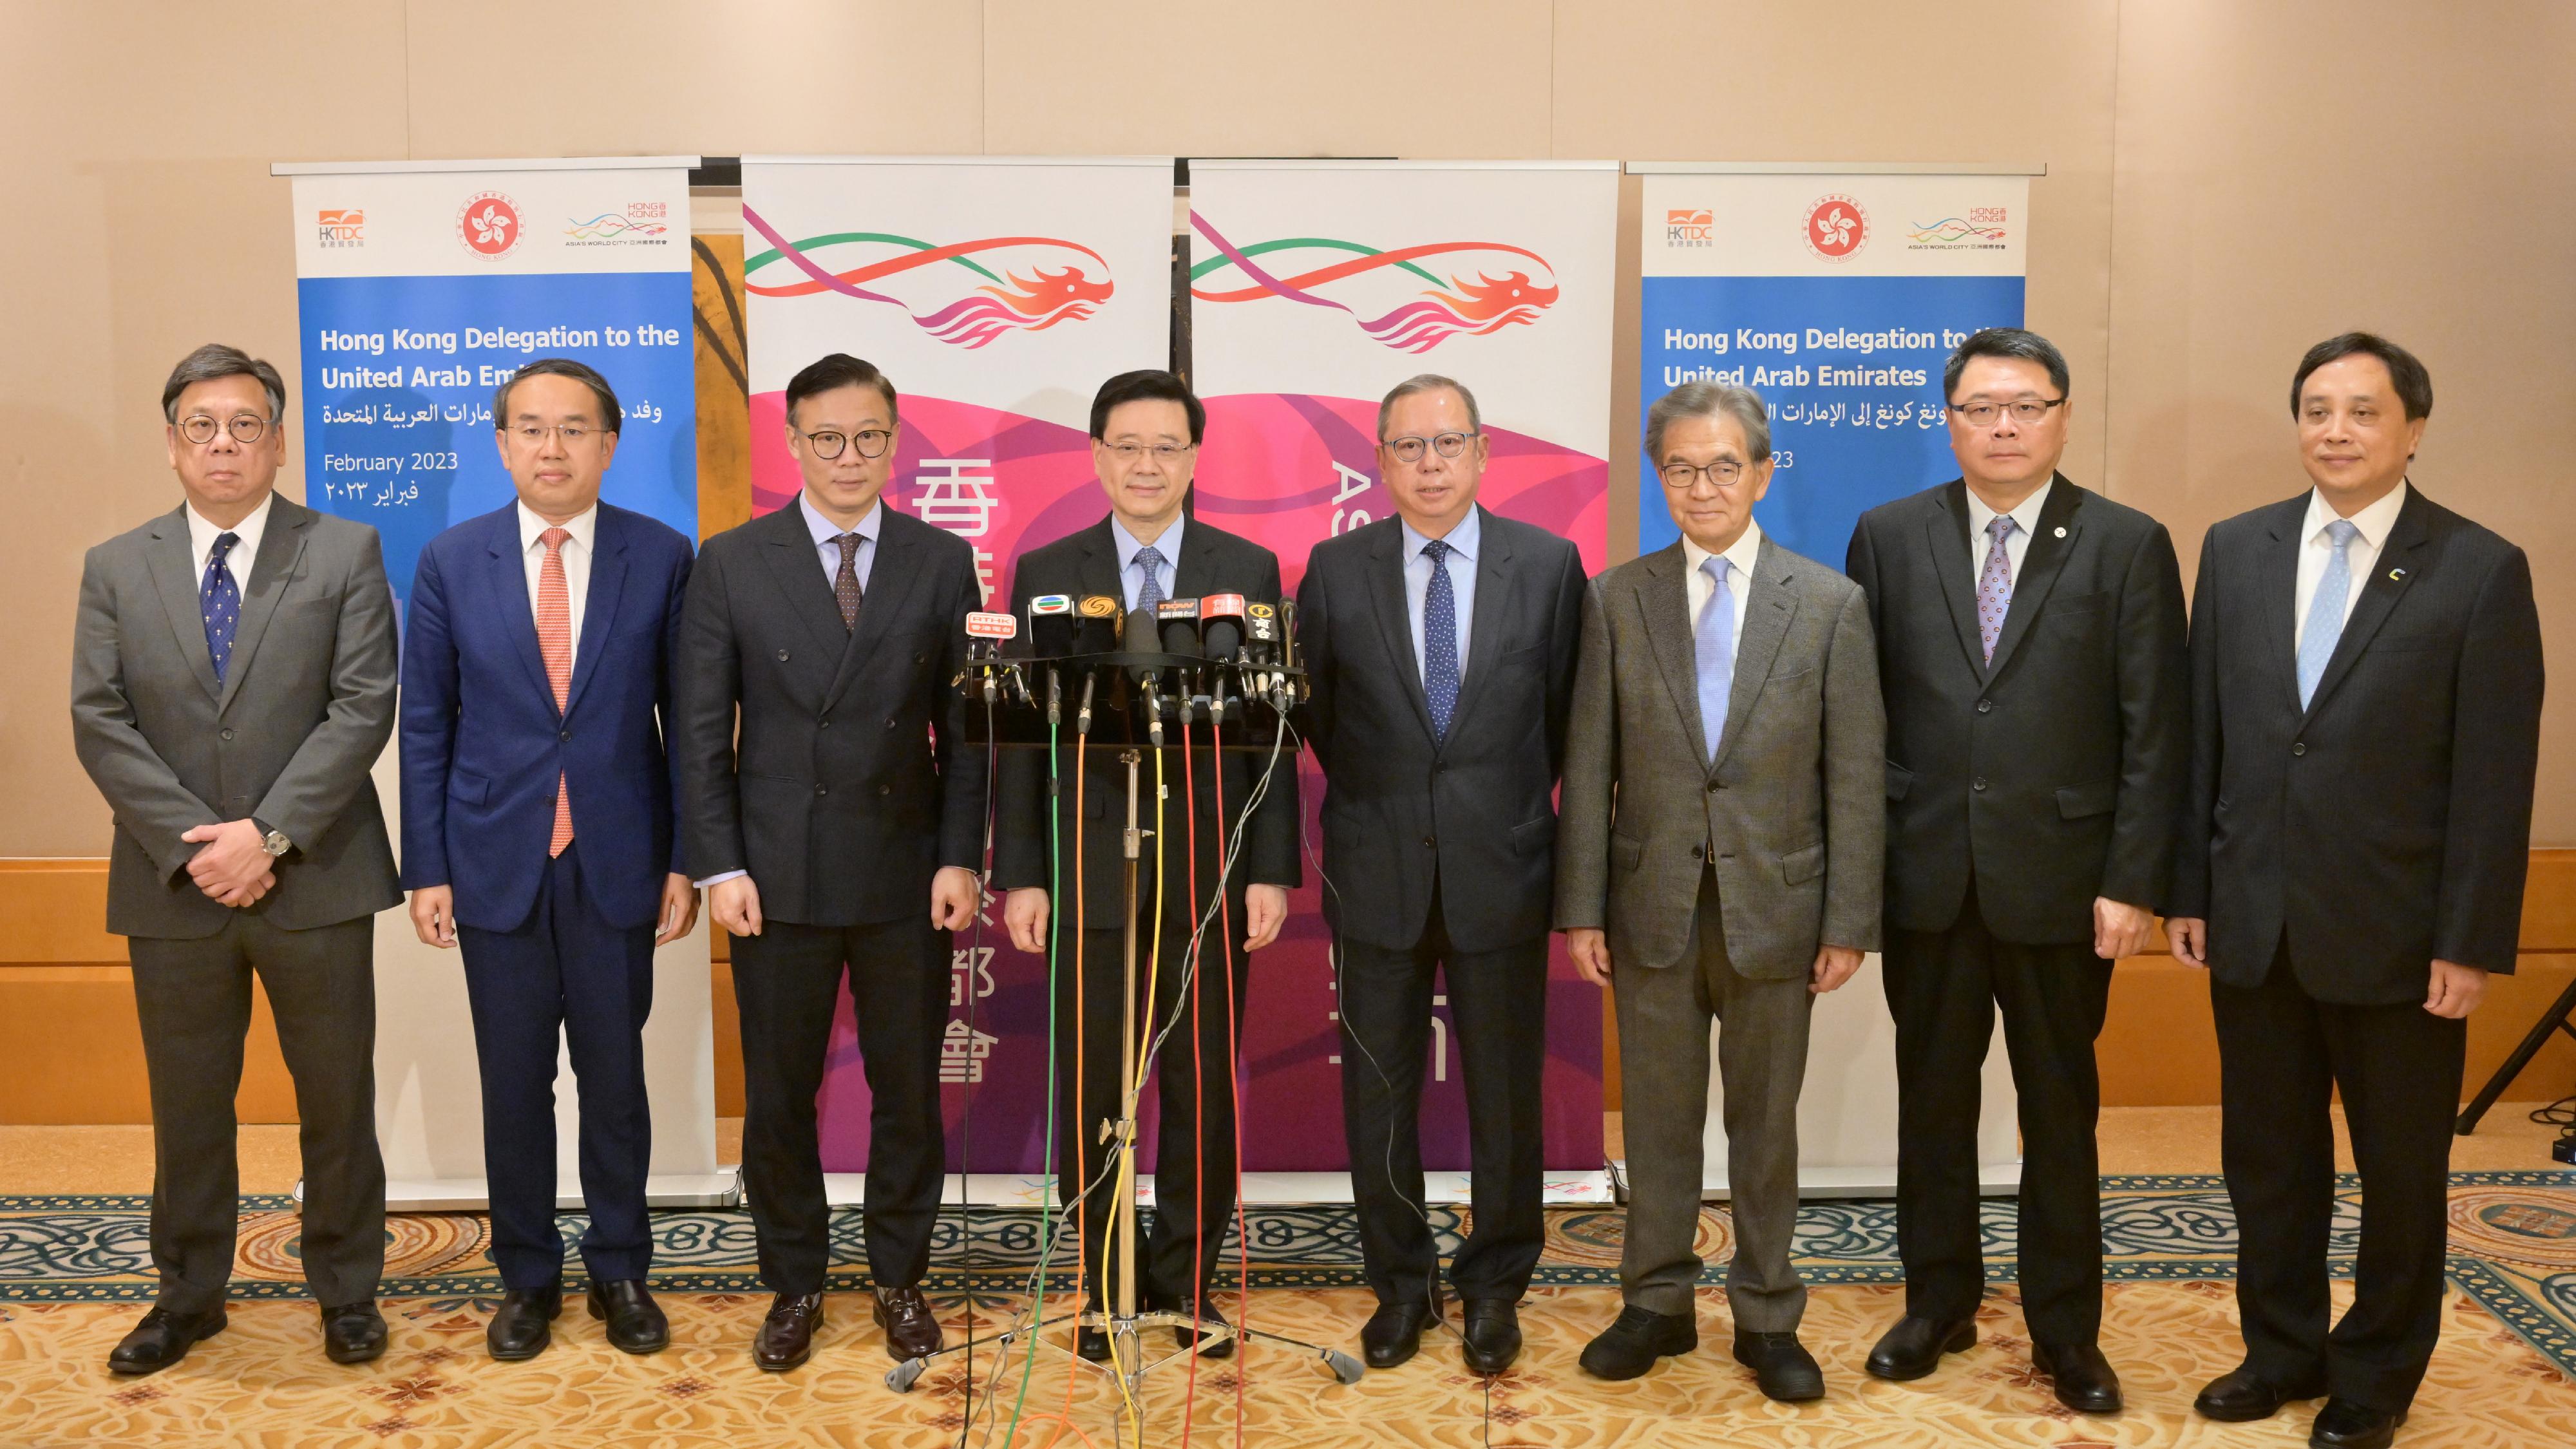 The Chief Executive, Mr John Lee (fourth left), together with the Deputy Secretary for Justice, Mr Cheung Kwok-kwan (third left); the Secretary for Financial Services and the Treasury, Mr Christopher Hui (second left); the Secretary for Commerce and Economic Development, Mr Algernon Yau (first left); the Chairman of the Hong Kong Trade Development Council, Dr Peter Lam (fourth right); the Chairman of the Airport Authority Hong Kong, Mr Jack So (third right); the Chairman of the Hong Kong Science and Technology Parks Corporation and the Chairman of the Federation of Hong Kong Industries, Dr Sunny Chai (second right); and the Chairman of the Hong Kong Cyberport Management Company Limited, Mr Simon Chan (first right), meet the media in Dubai, the United Arab Emirates, today (February 10, Dubai time).